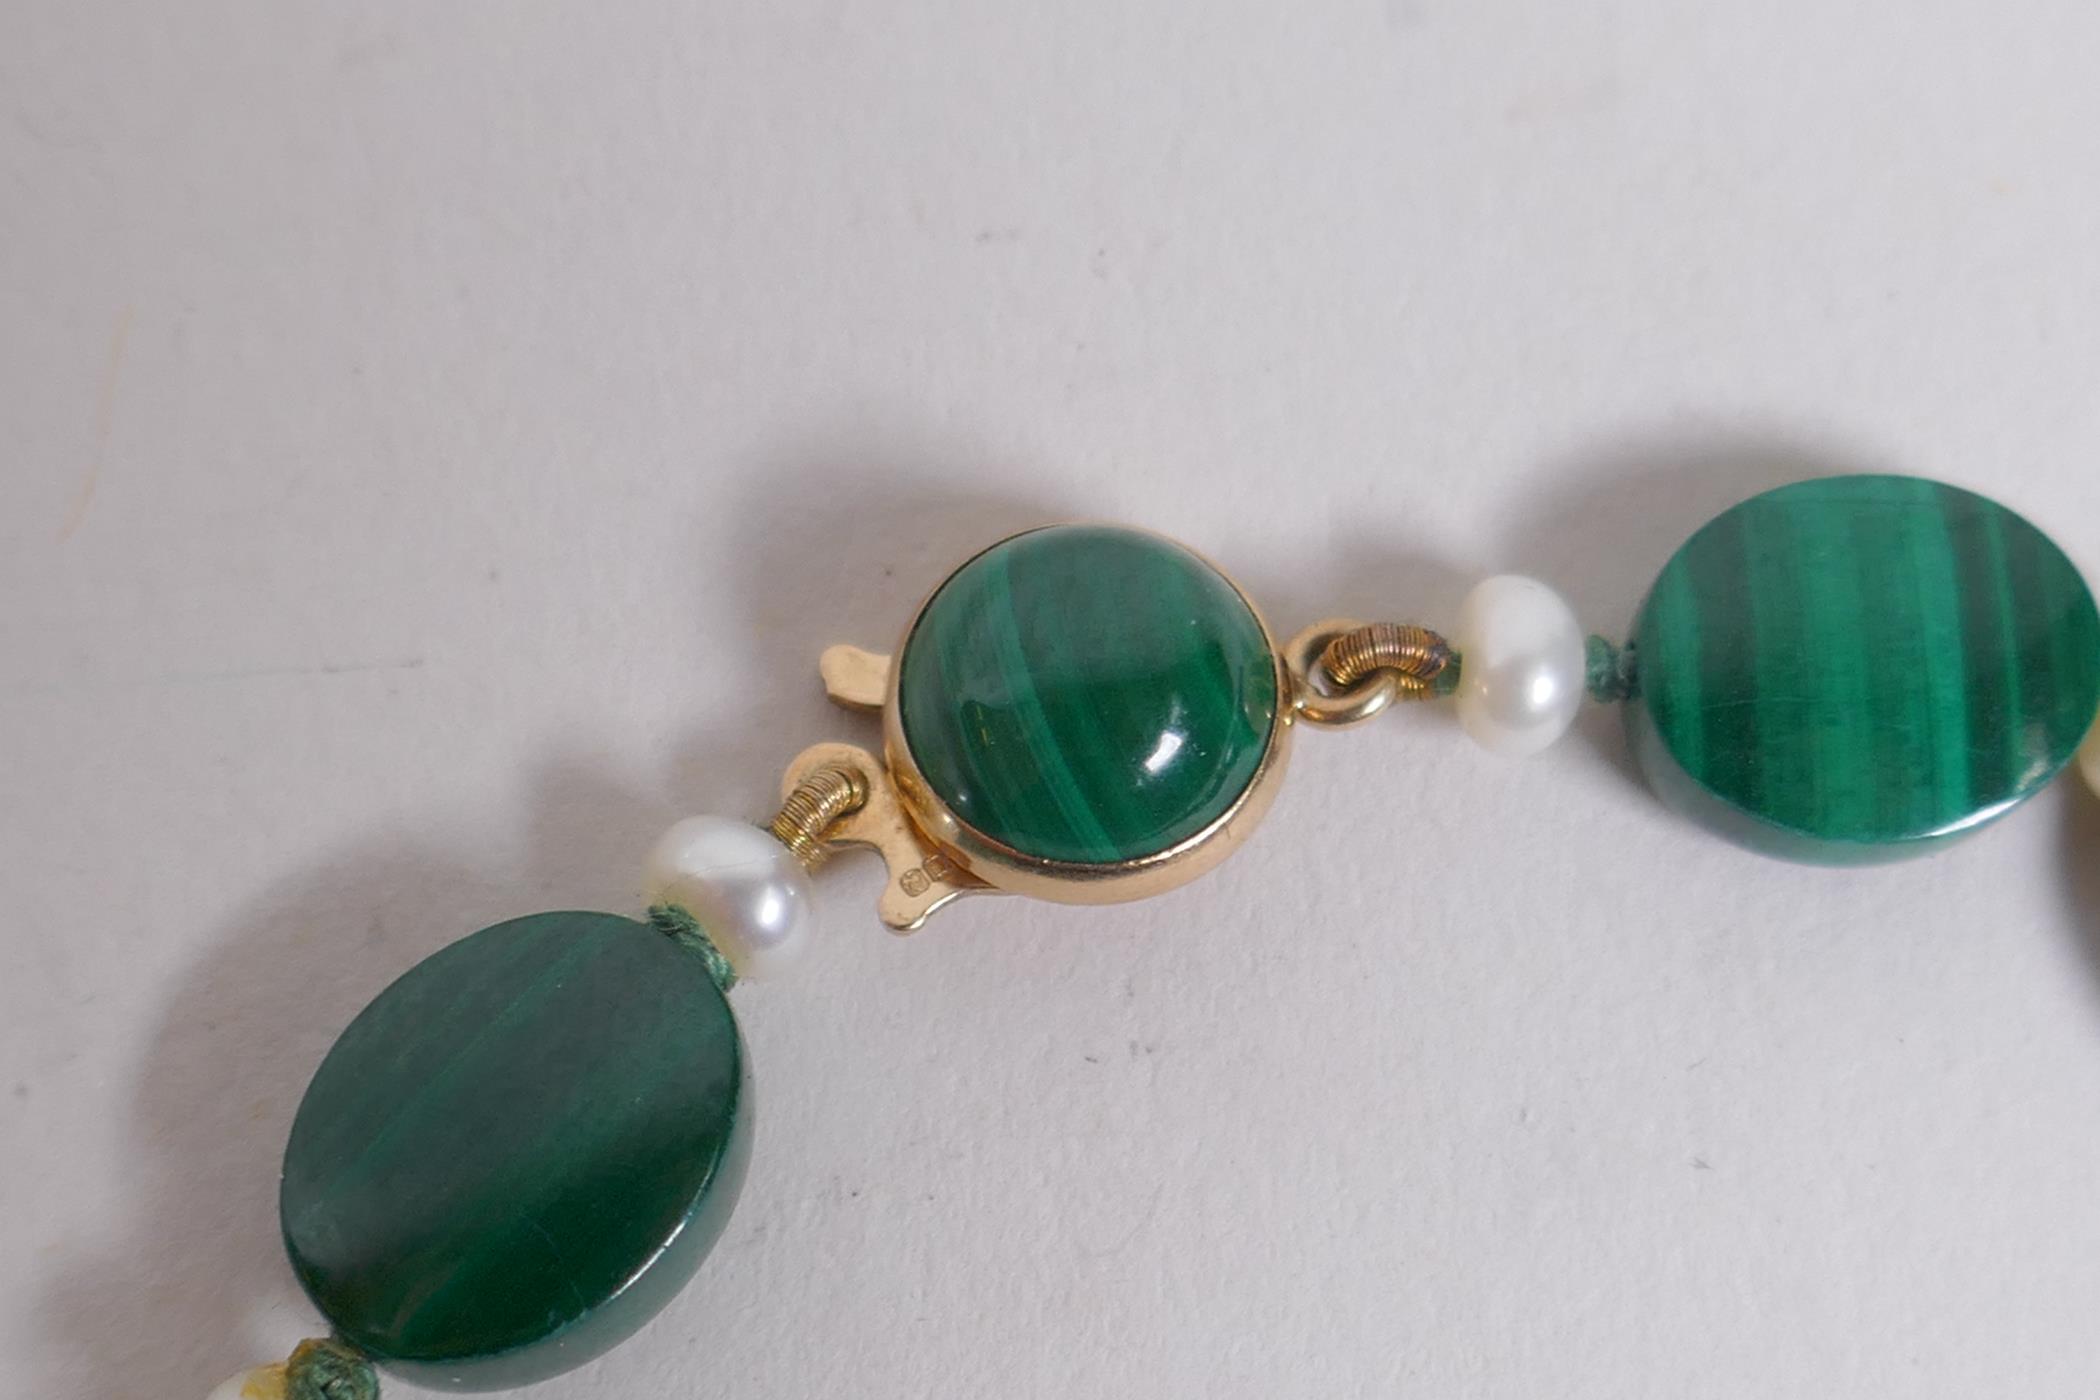 A malachite bead and seed pearl necklace with a 9ct gold clasp, 33cm long - Image 5 of 6